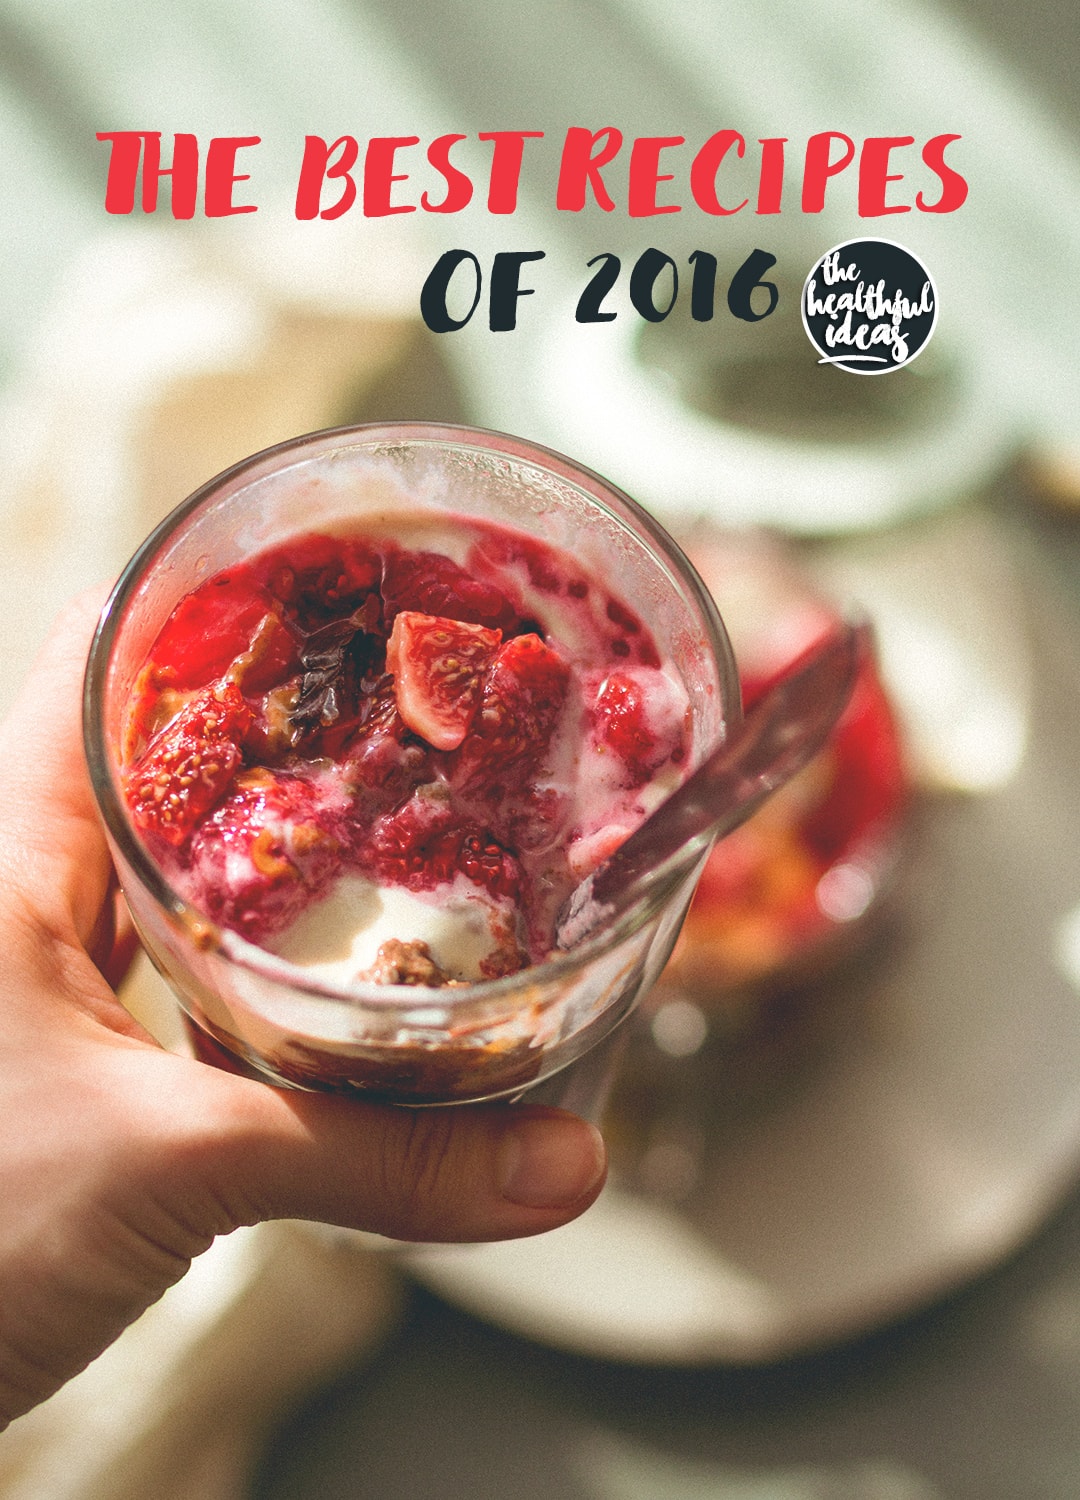 The Best Recipes of 2016 & Goals for the New Year